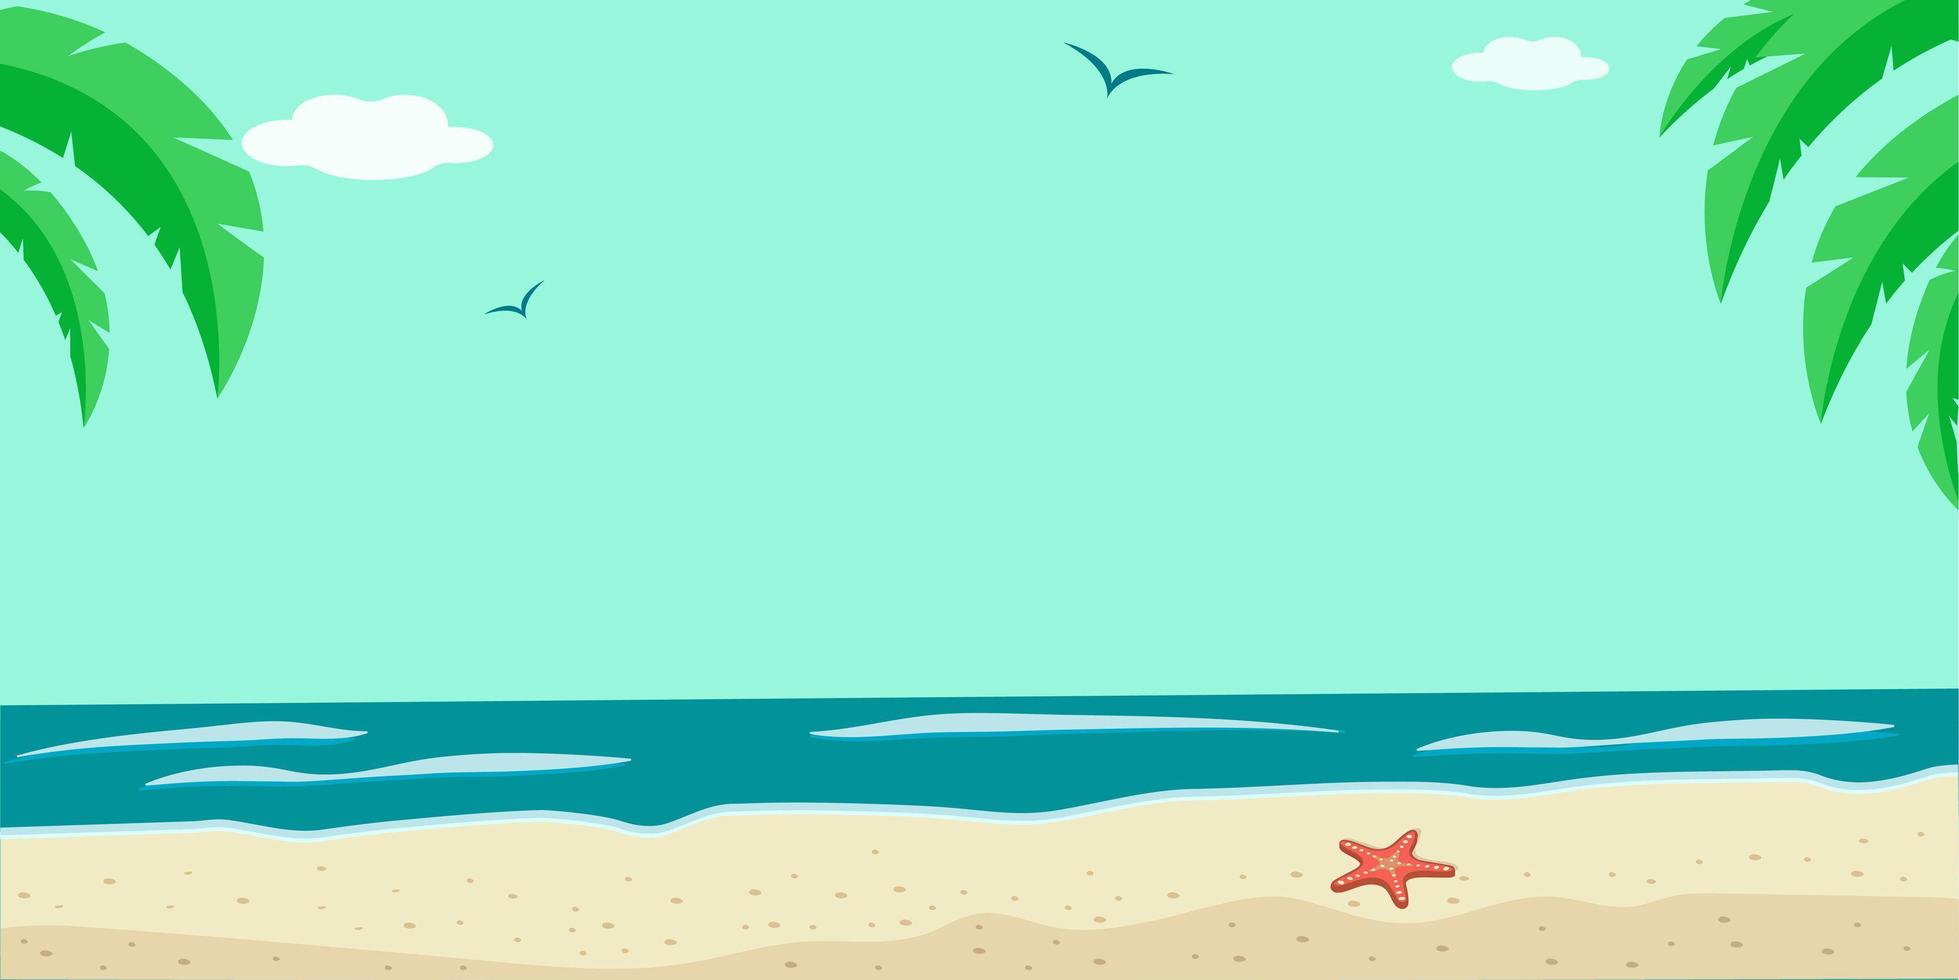 Beautiful vector illustration of a wild beach without people with white sand.